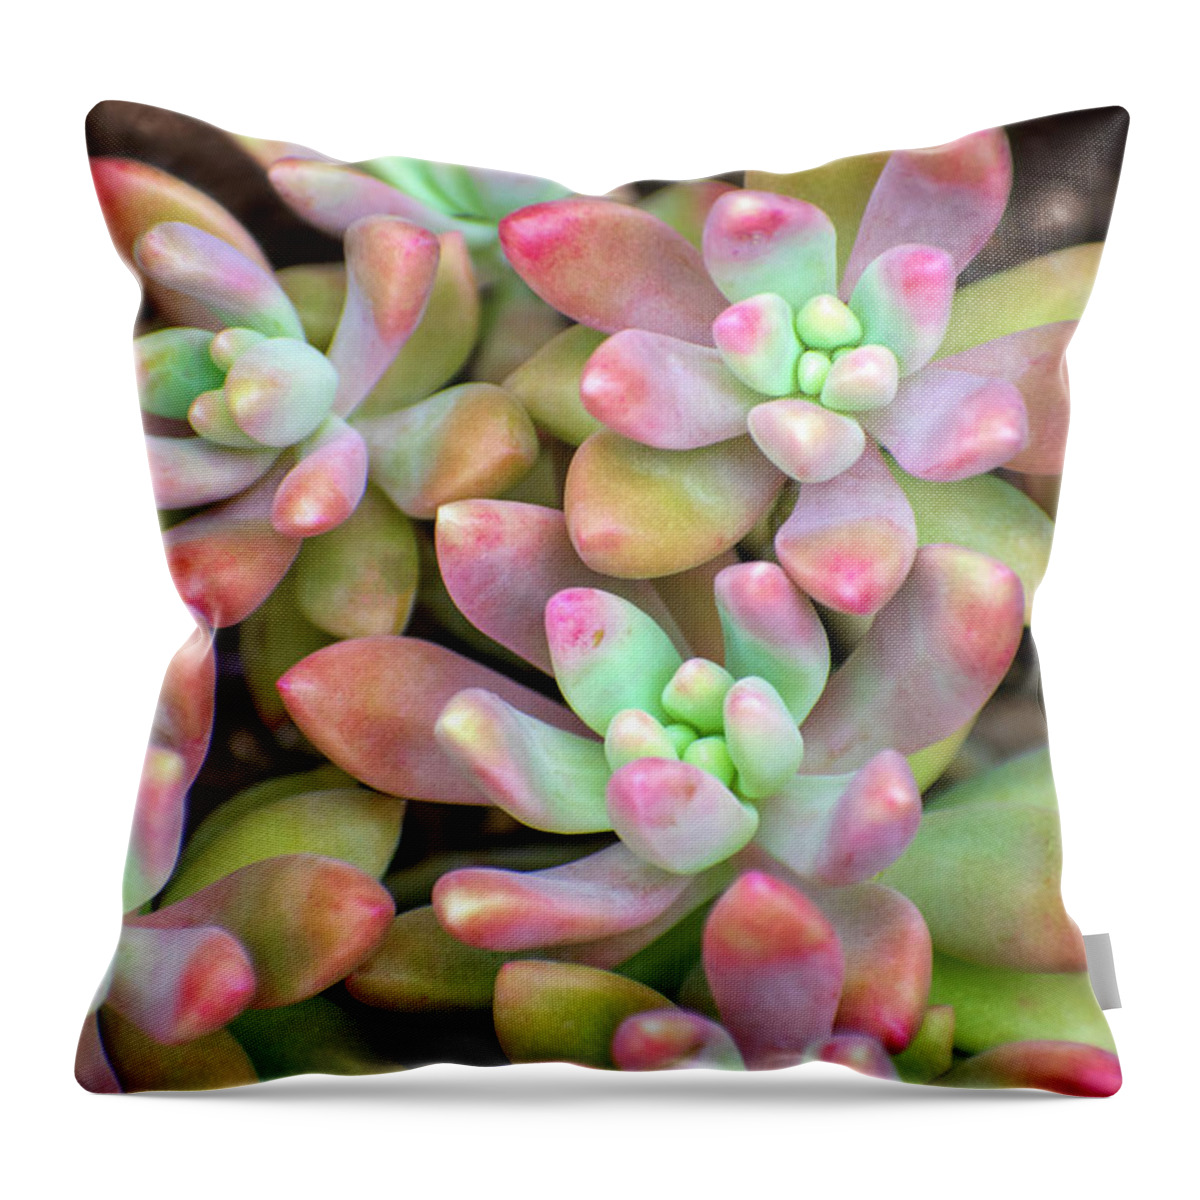 Plant Throw Pillow featuring the photograph Colorful Succulent Moonstone Plants by Christina Rollo